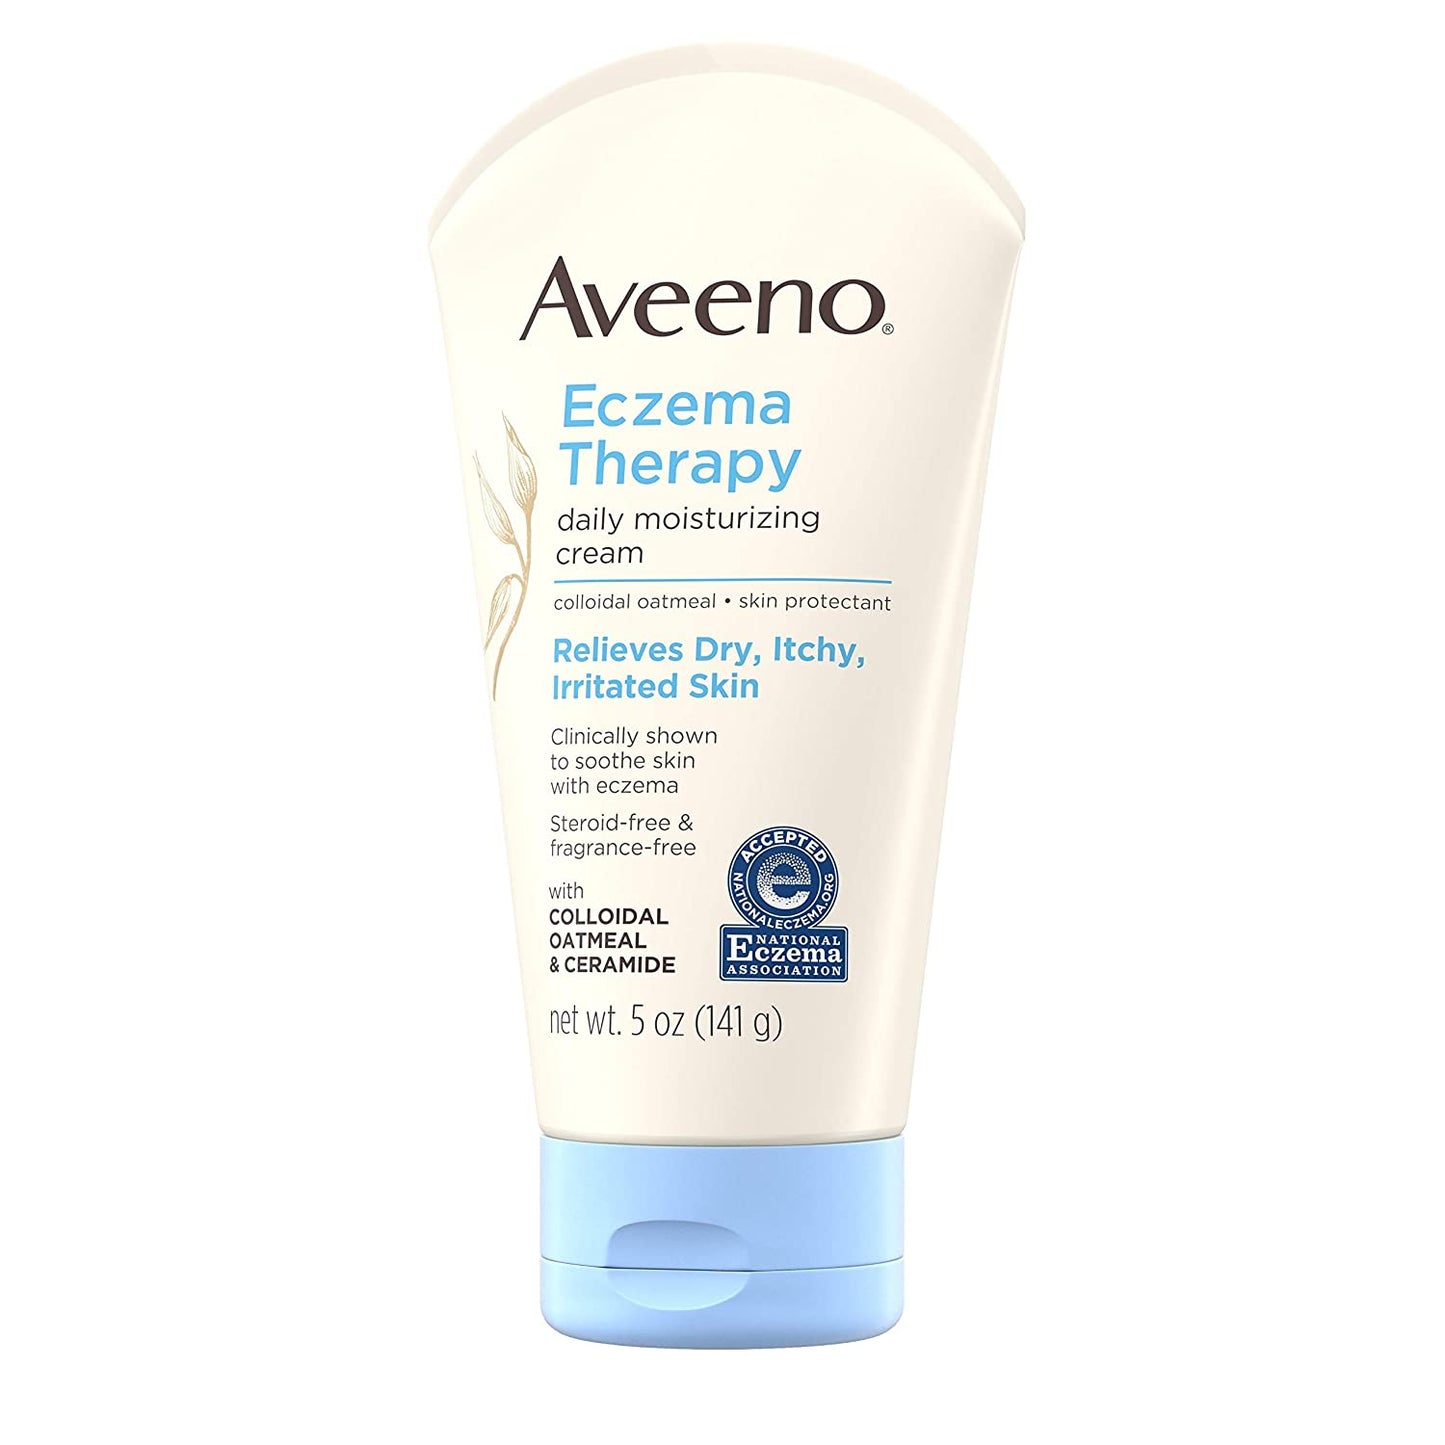 Aveeno Eczema Therapy Daily Moisturizing Cream with Colloidal Oatmeal & Ceramide For Dry, Itchy, Irritated Skin, 5 oz. / 141g